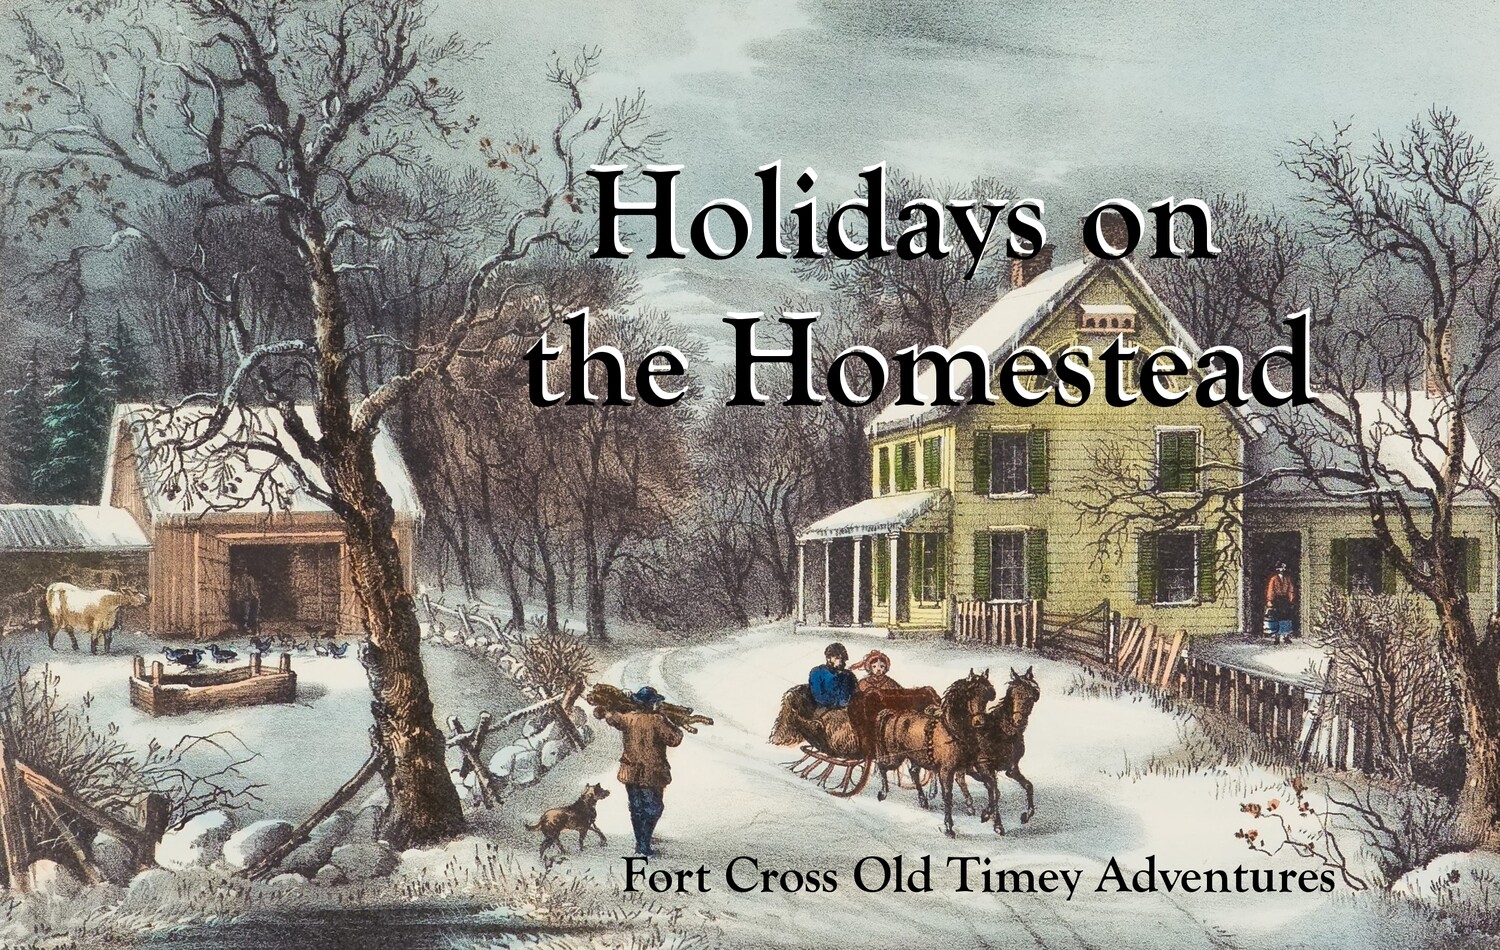 December 7 Holidays on the Homestead field trip event; 10 am - 2 pm